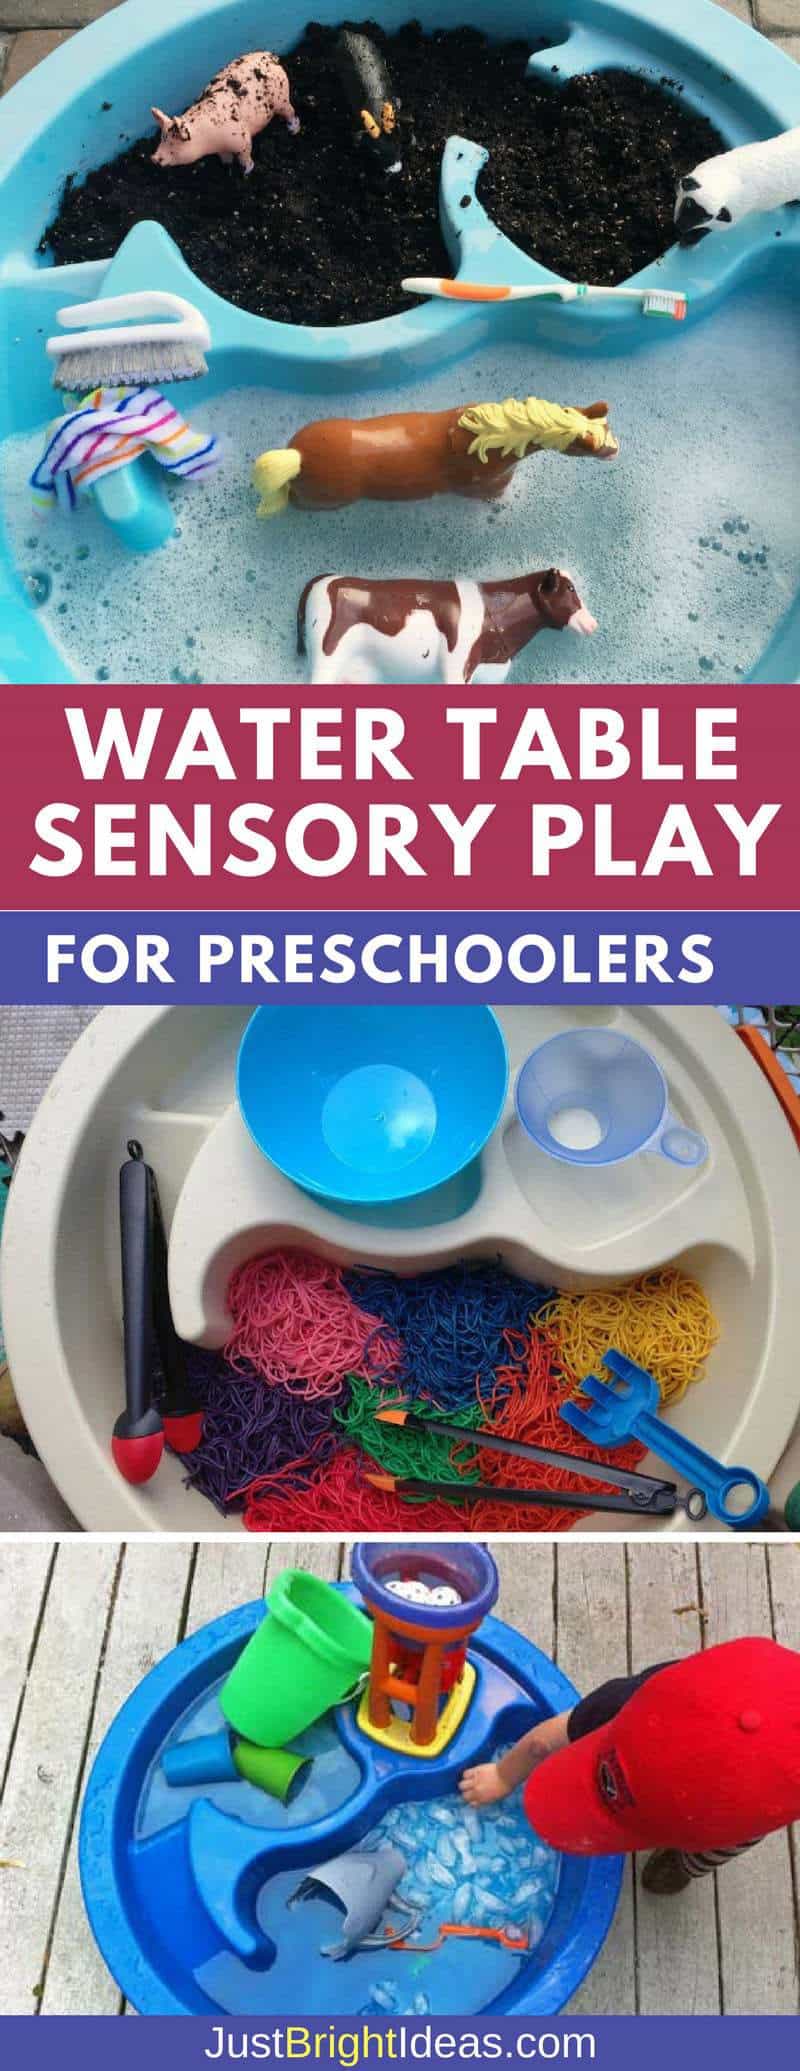 water table sensory play for preschoolers